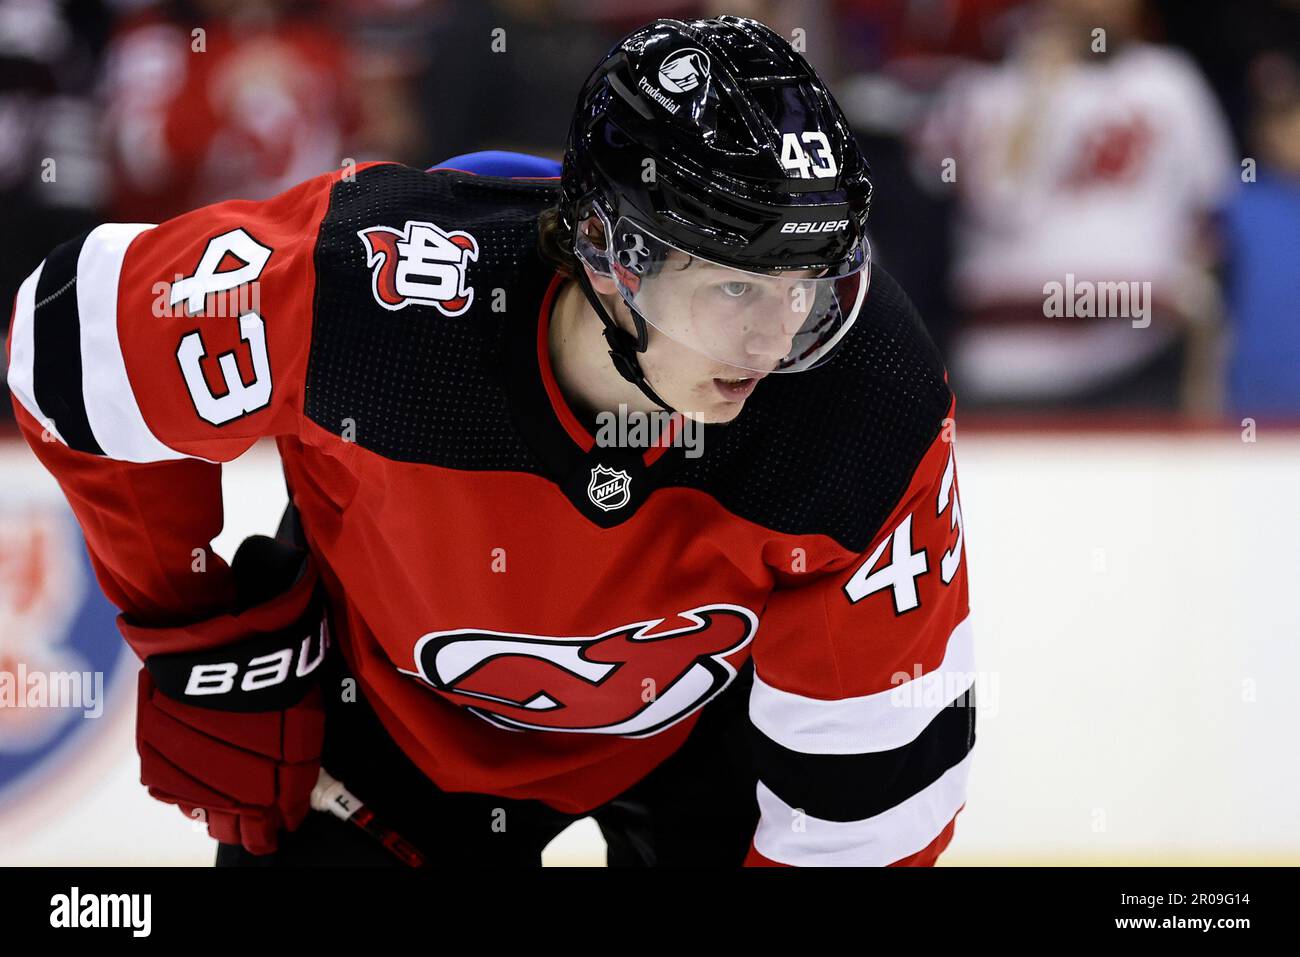 NHL Stanley Cup Playoffs Game Preview : New Jersey Devils vs